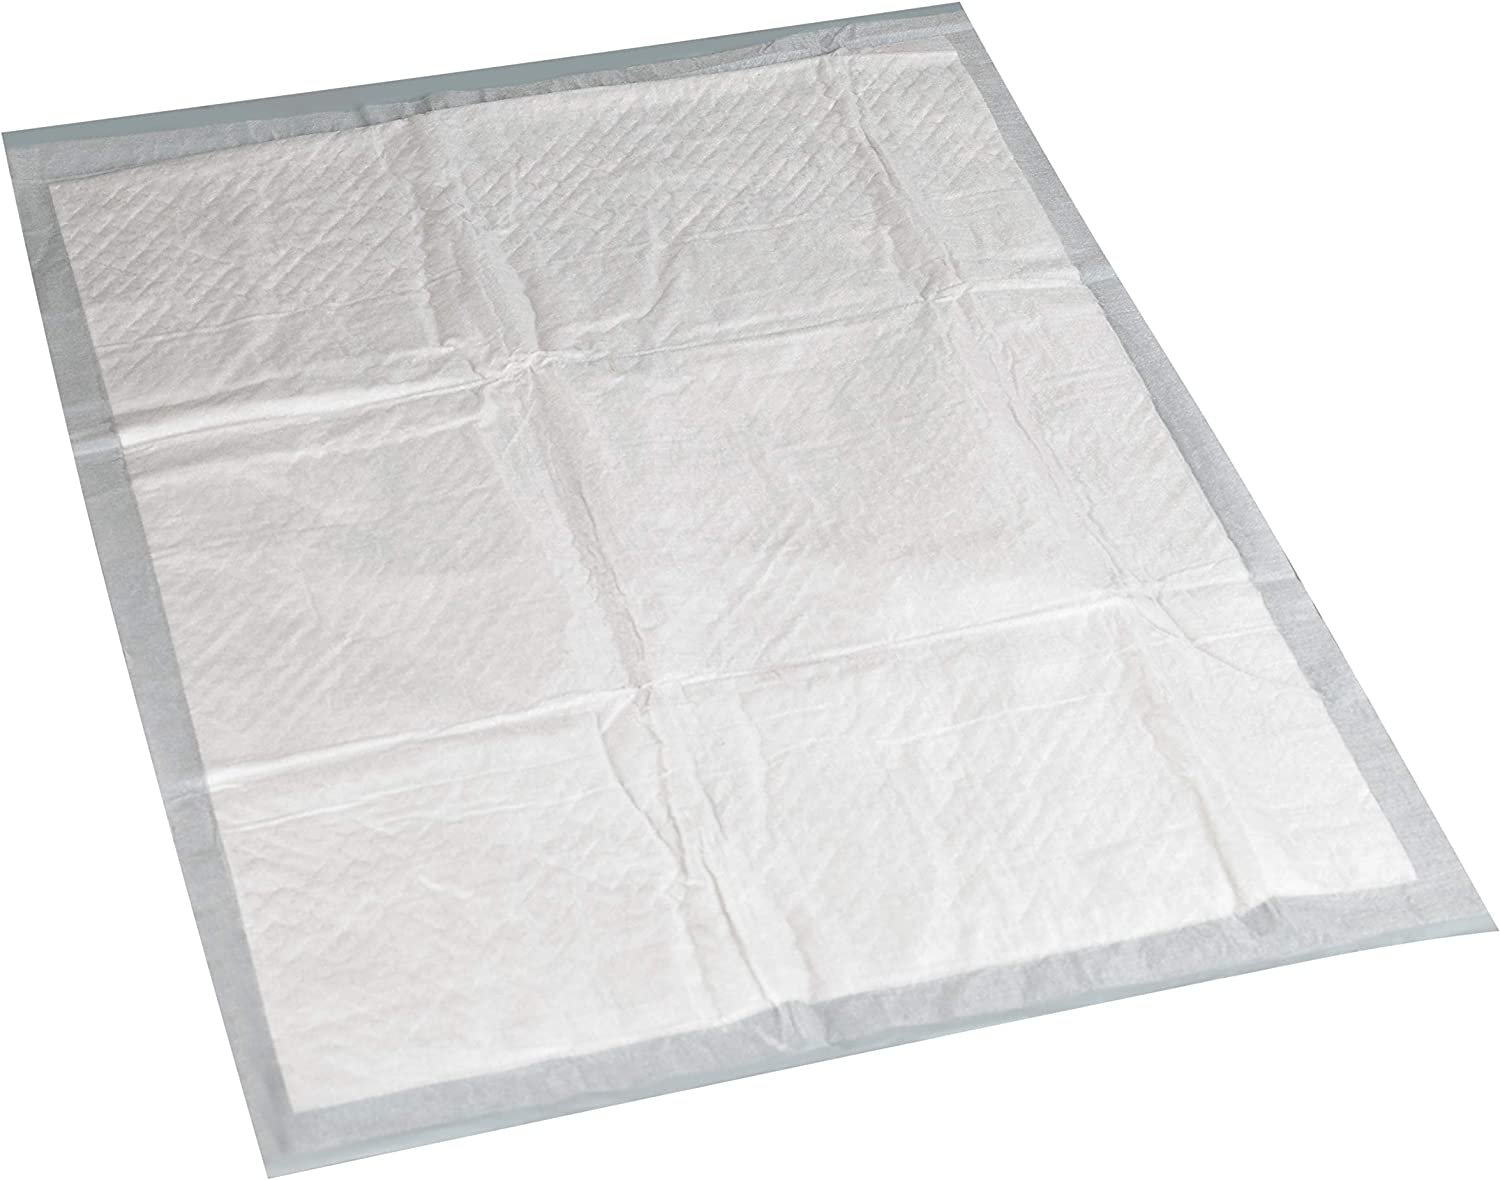 Disposable Changing Pad by Babymoov.